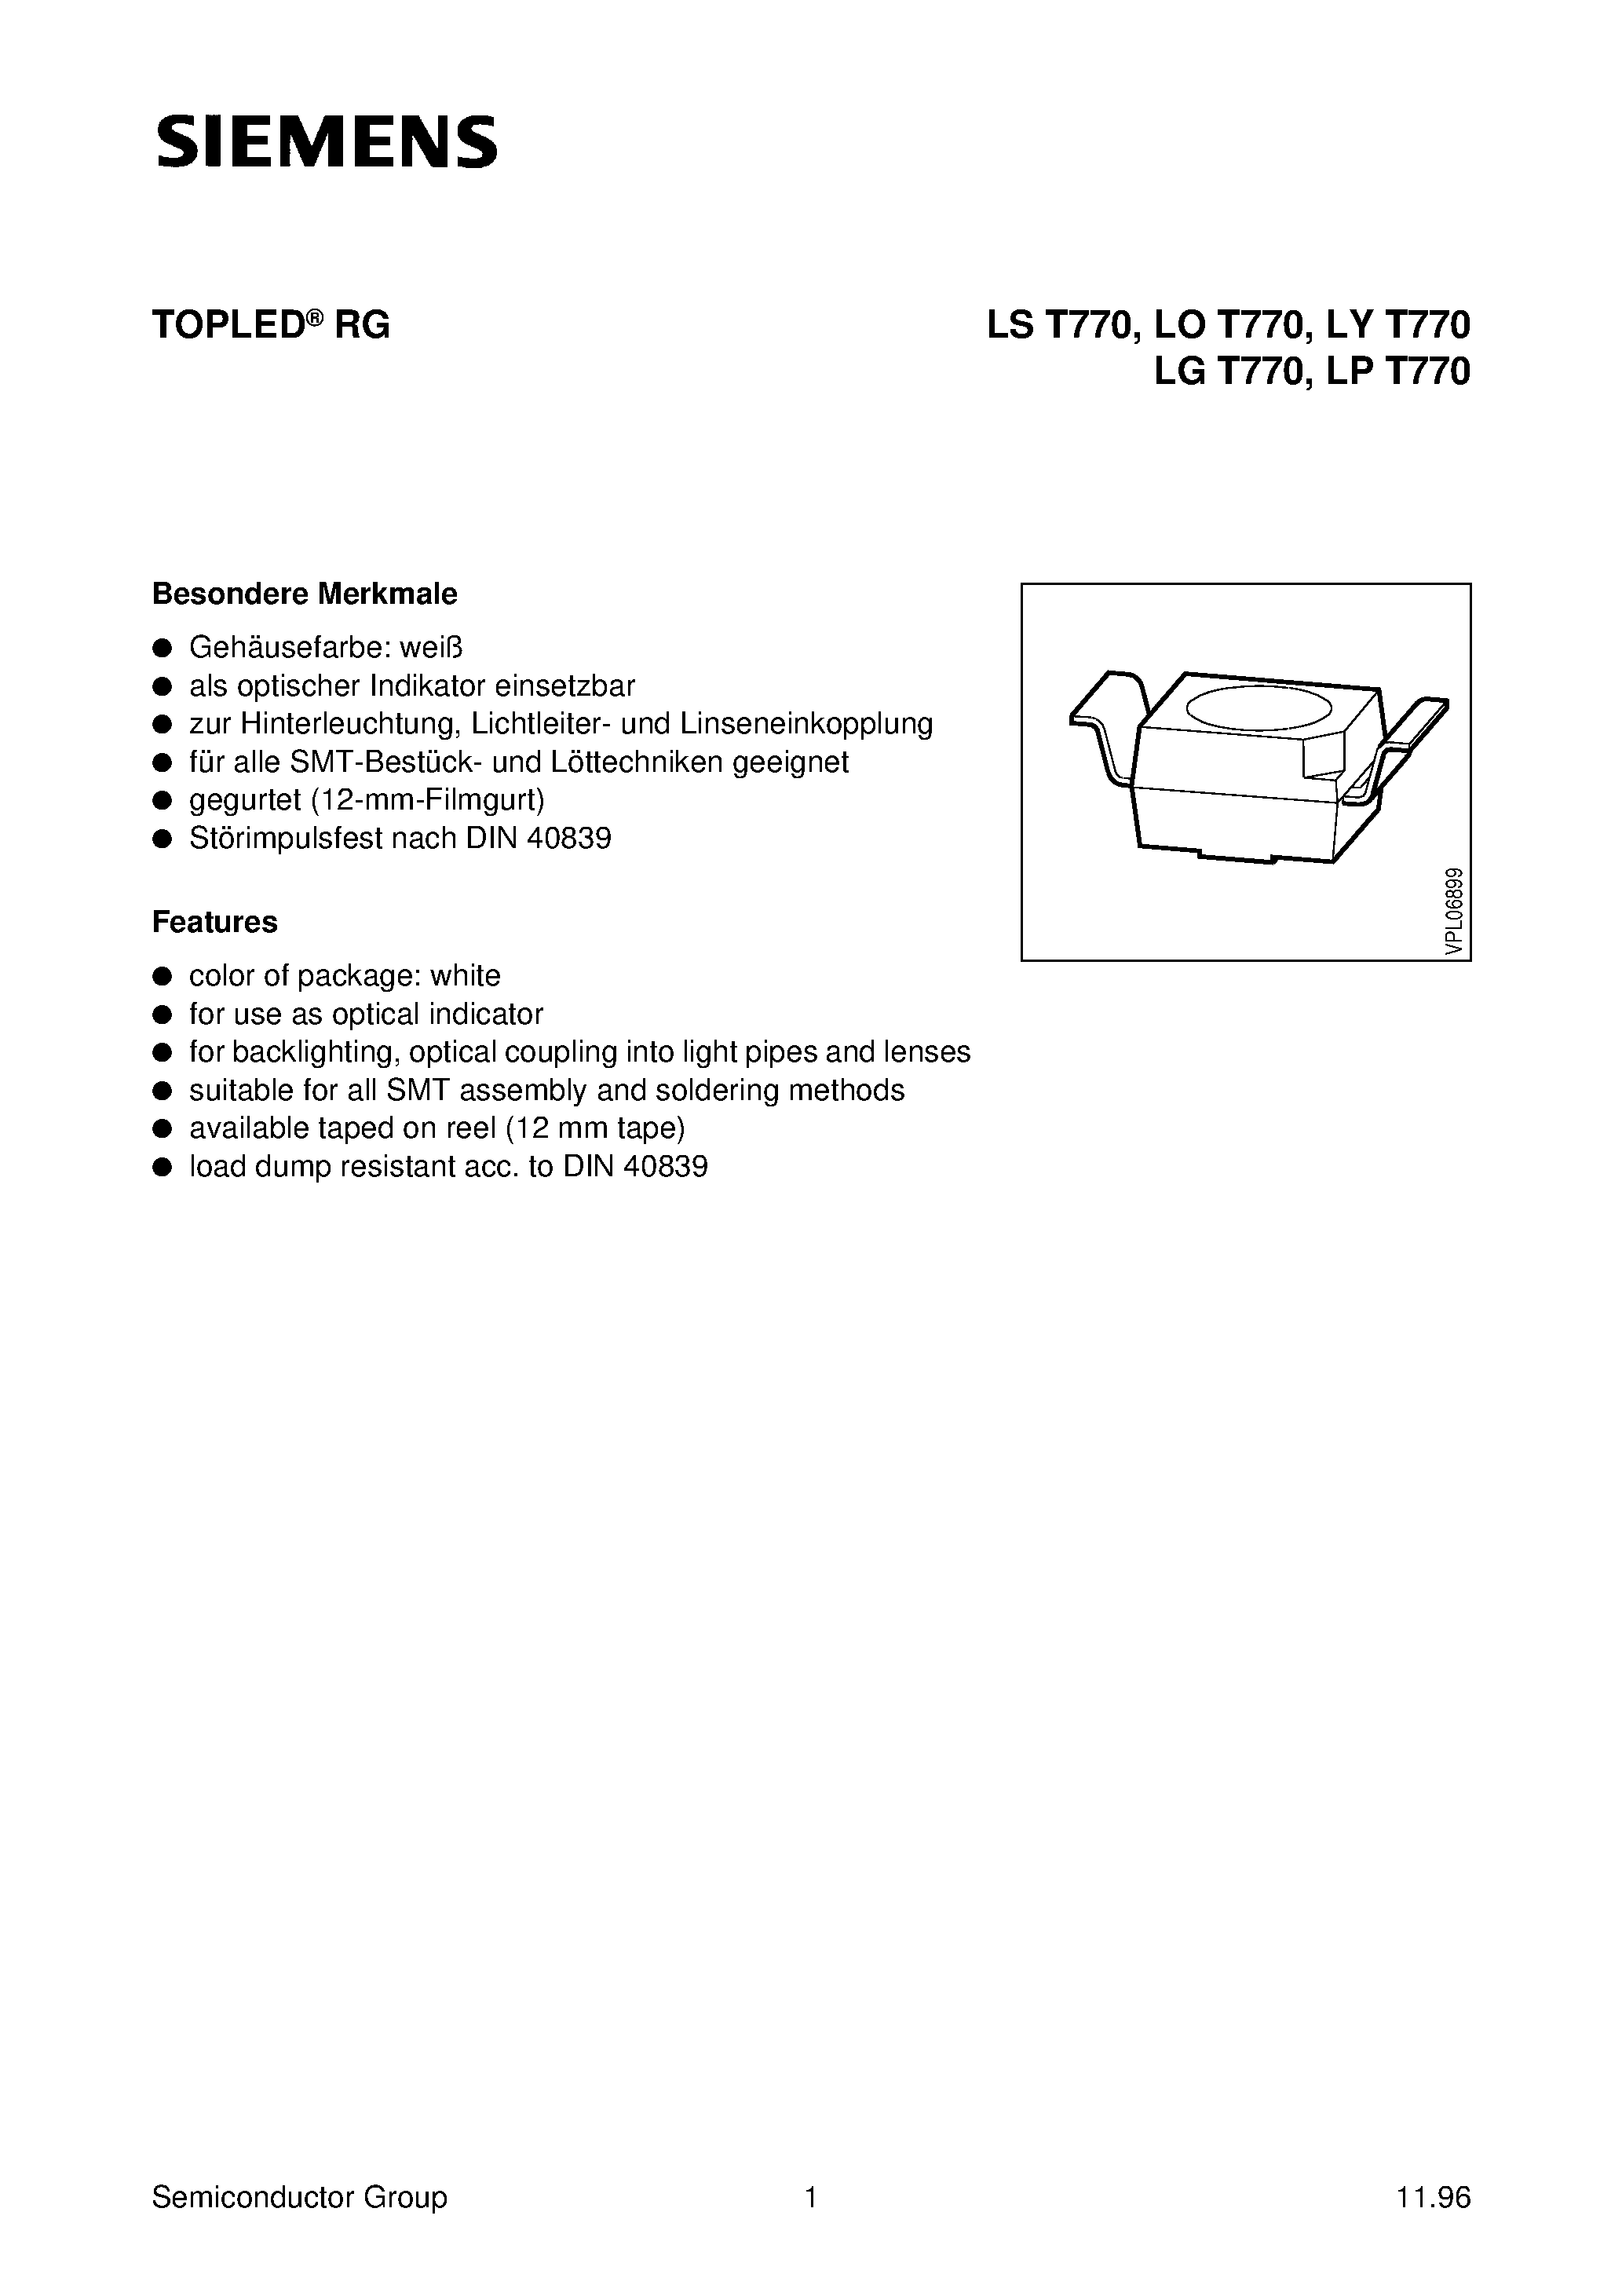 Datasheet LST770-K - TOPLED RG page 1